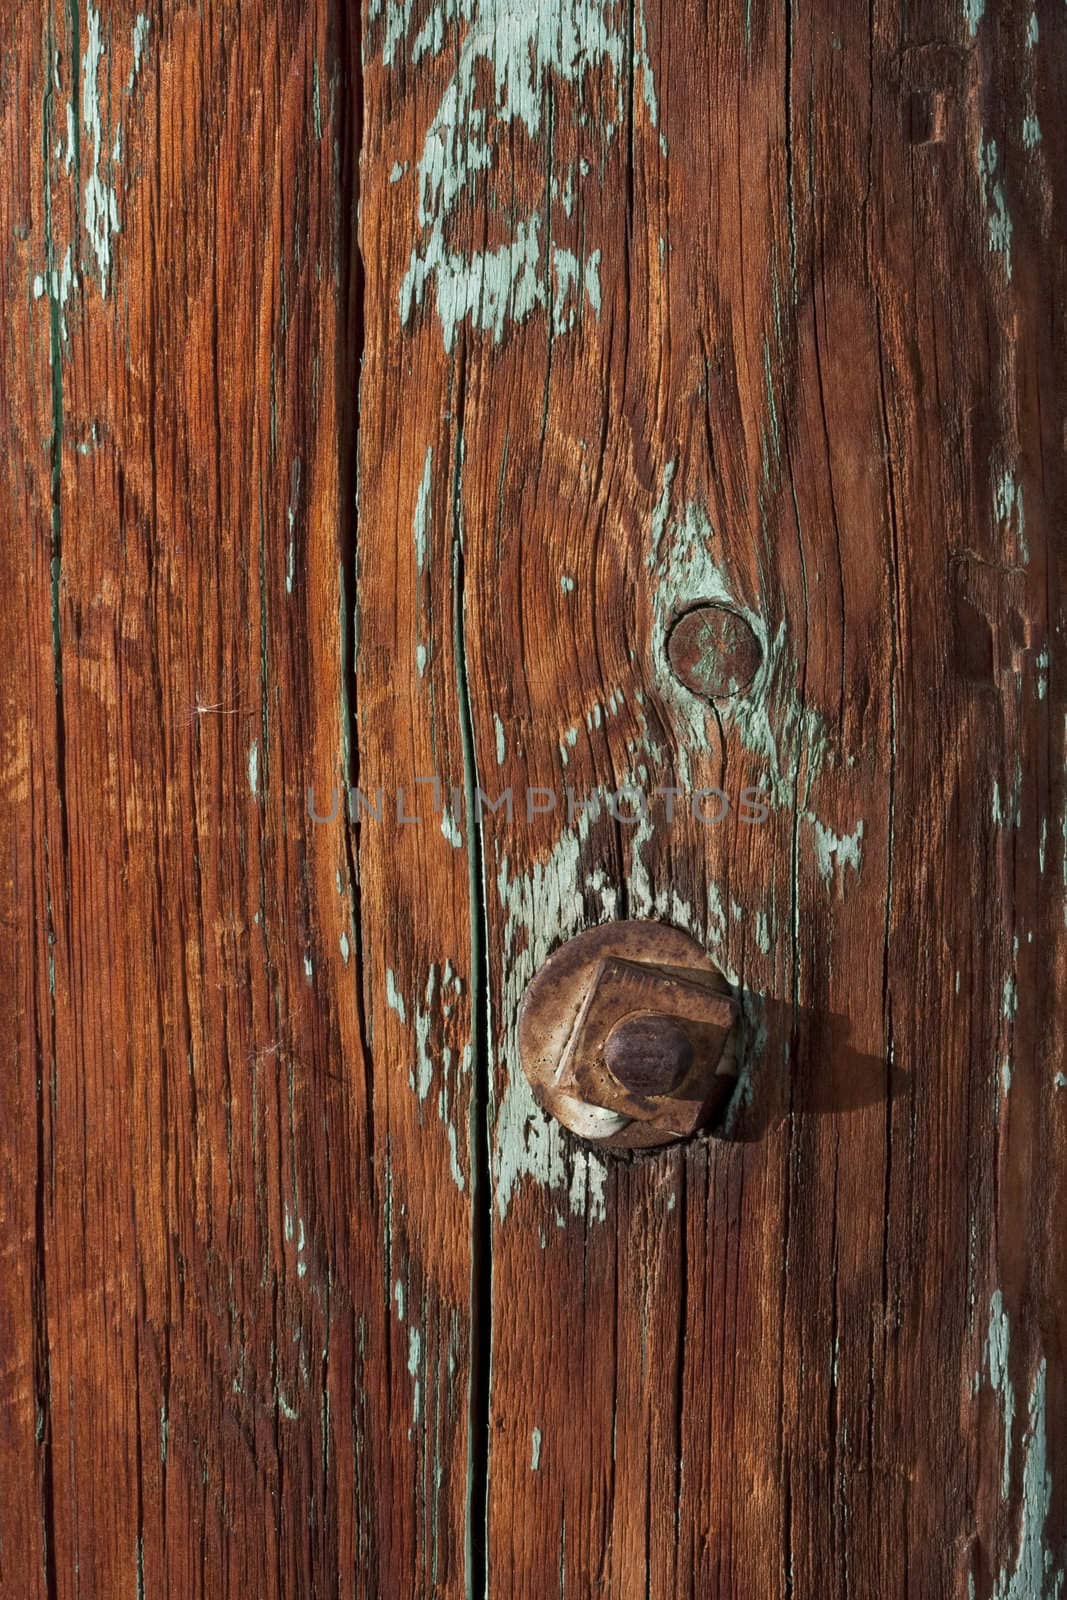 weathered wood of old barn post with knots, rusty bolt and traces of green paint